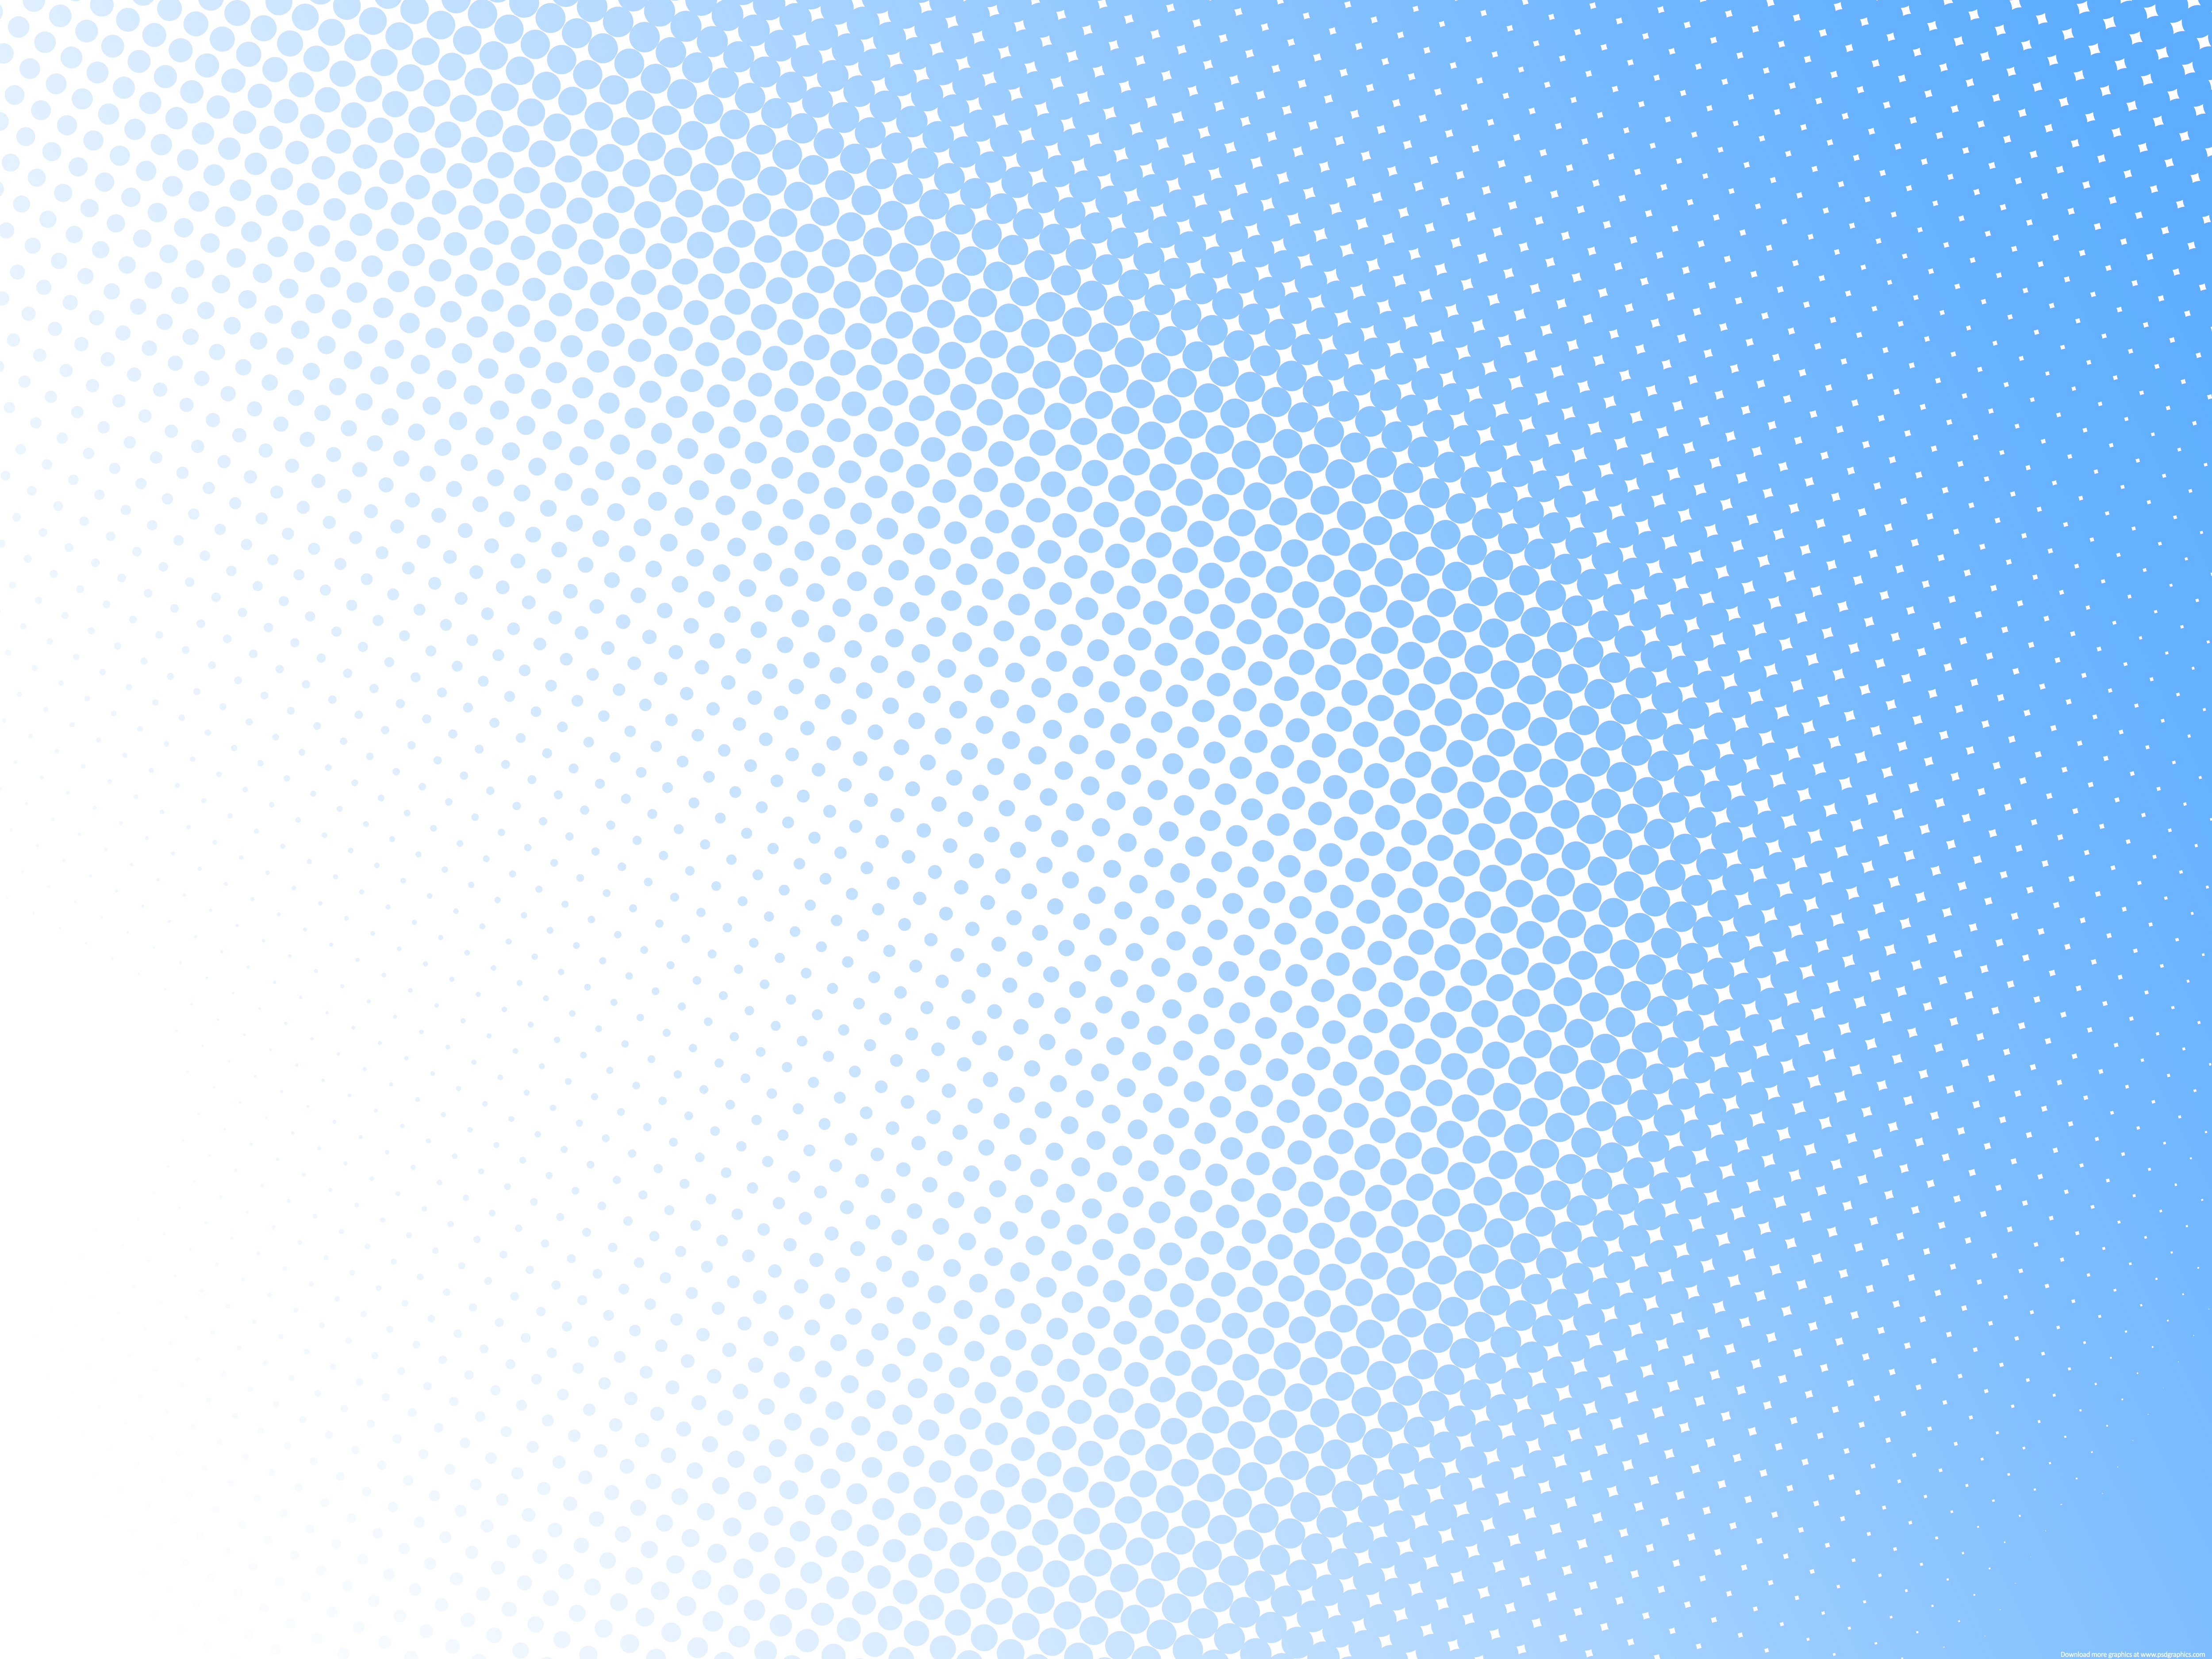 Tags Background Blue Dotted Halftone Pattern Hi Res Light